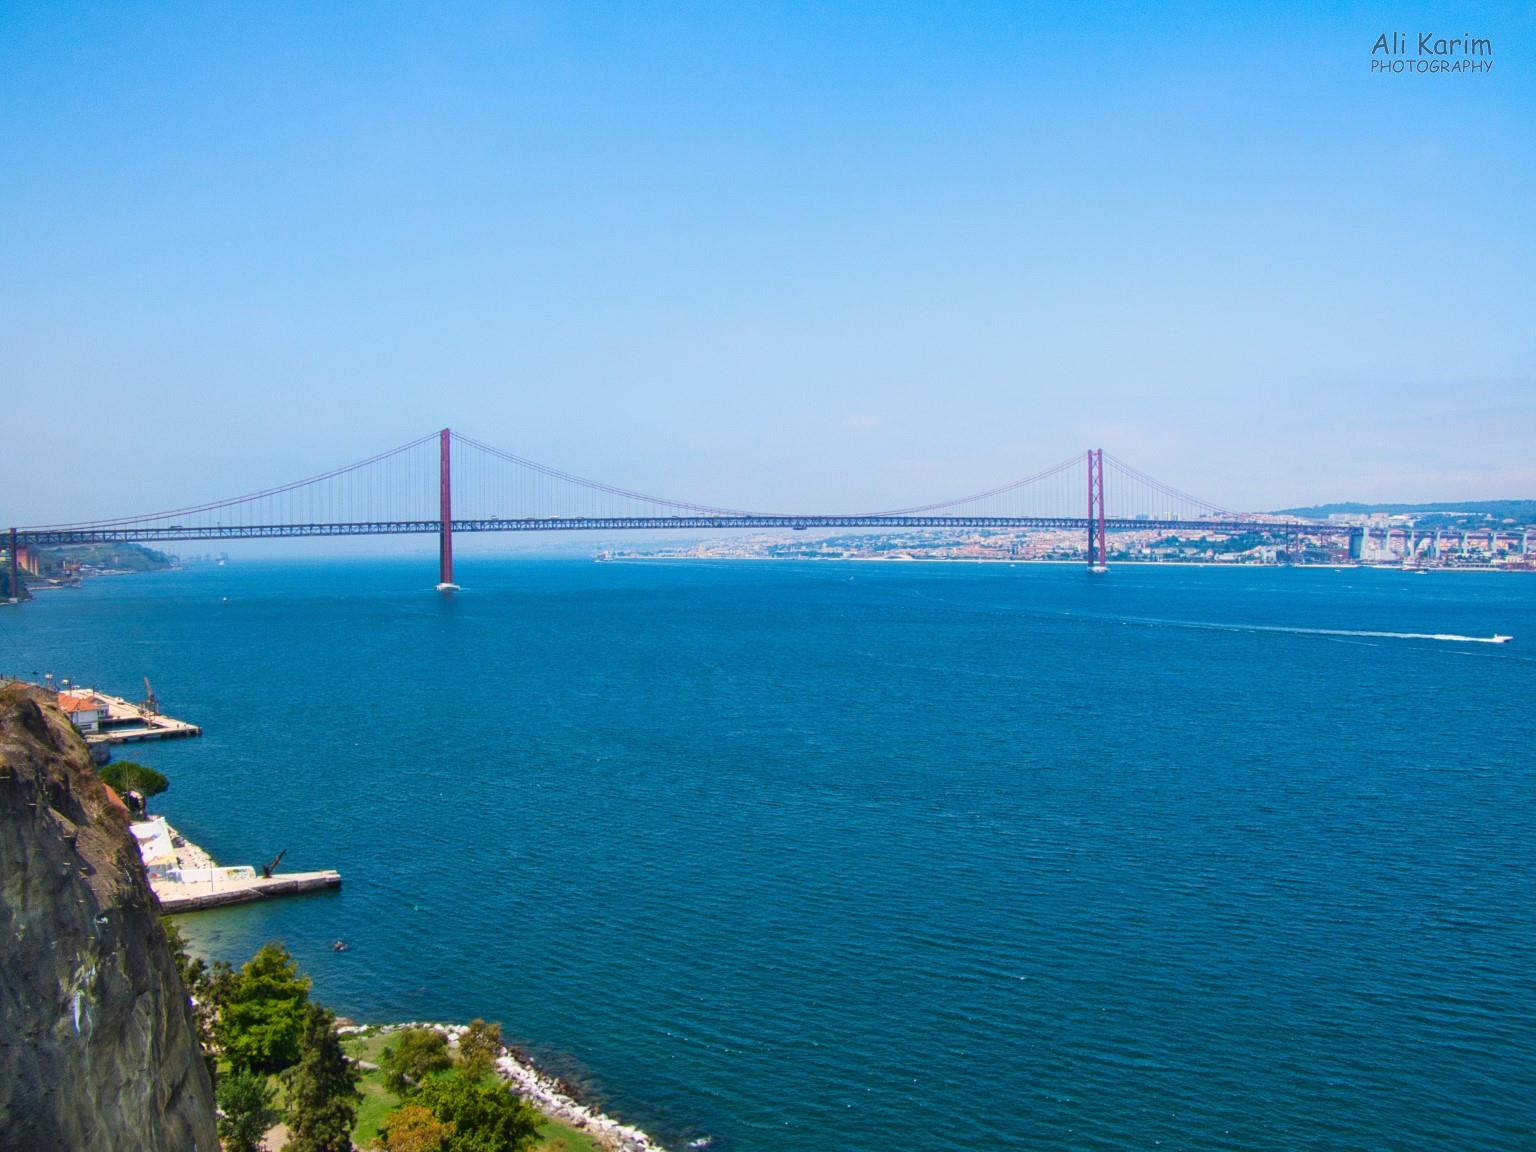 View of the “San Francisco” bridge, designed by the same architect of the Golden Gate bridge in San Francisco